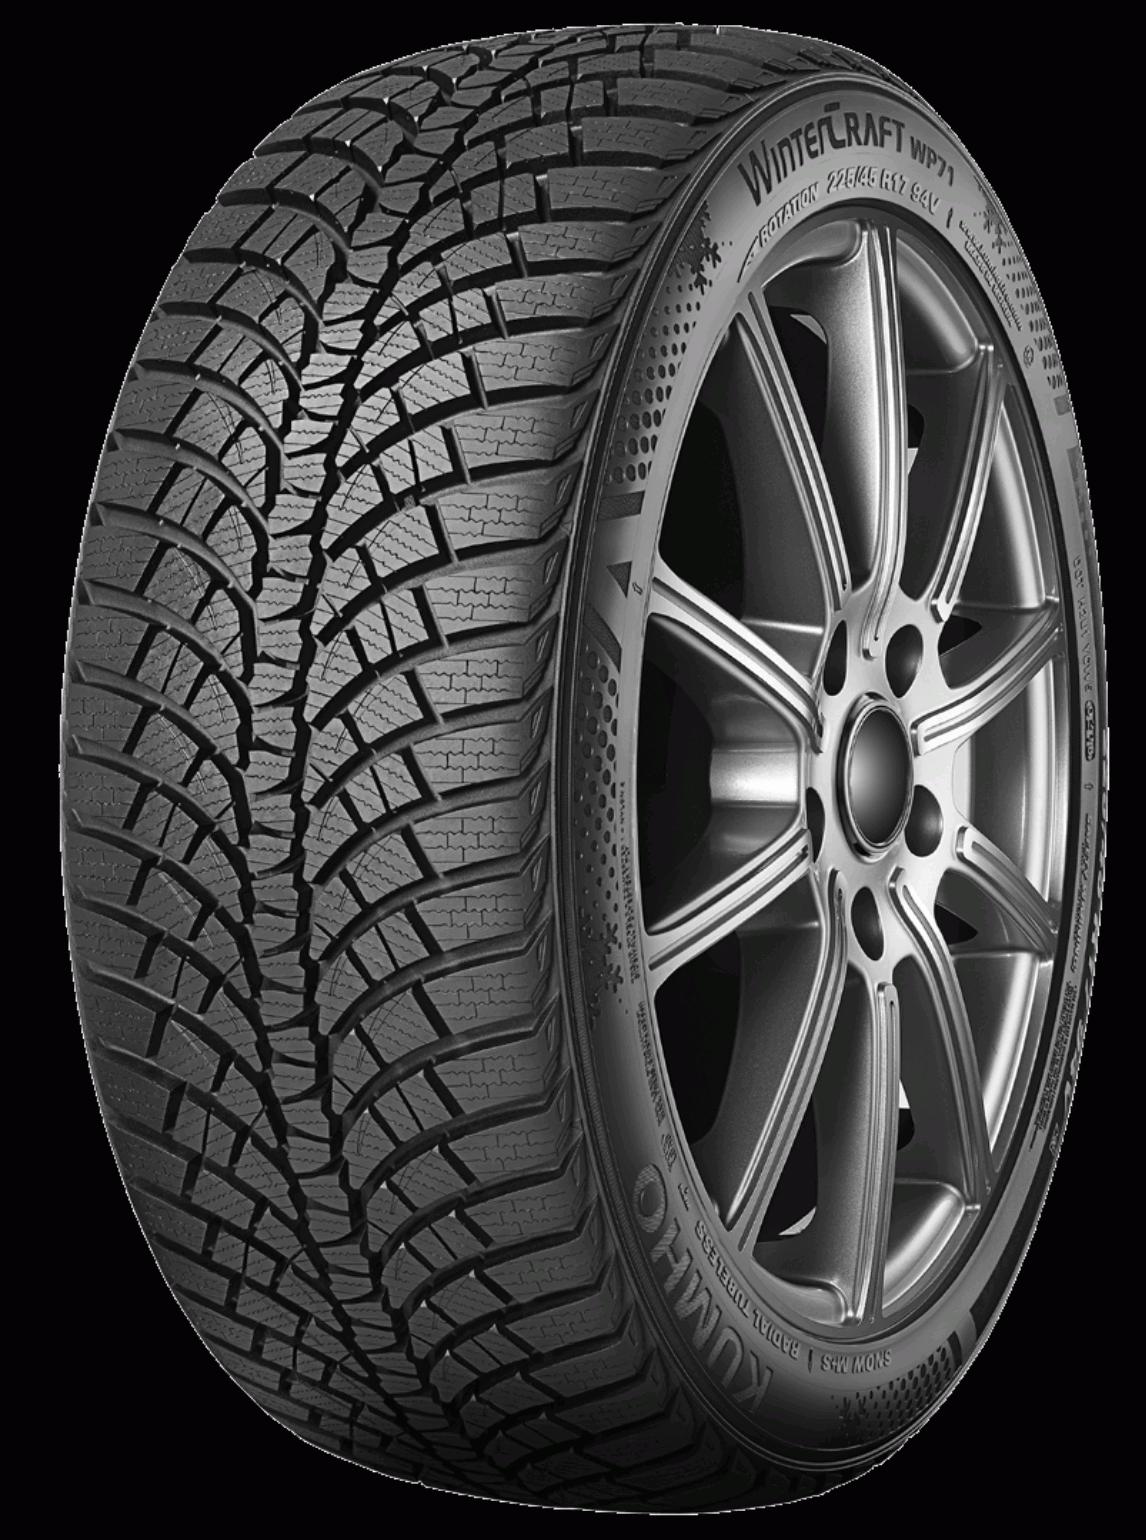 Kumho WinterCraft WS71 Tire and Tests Reviews 